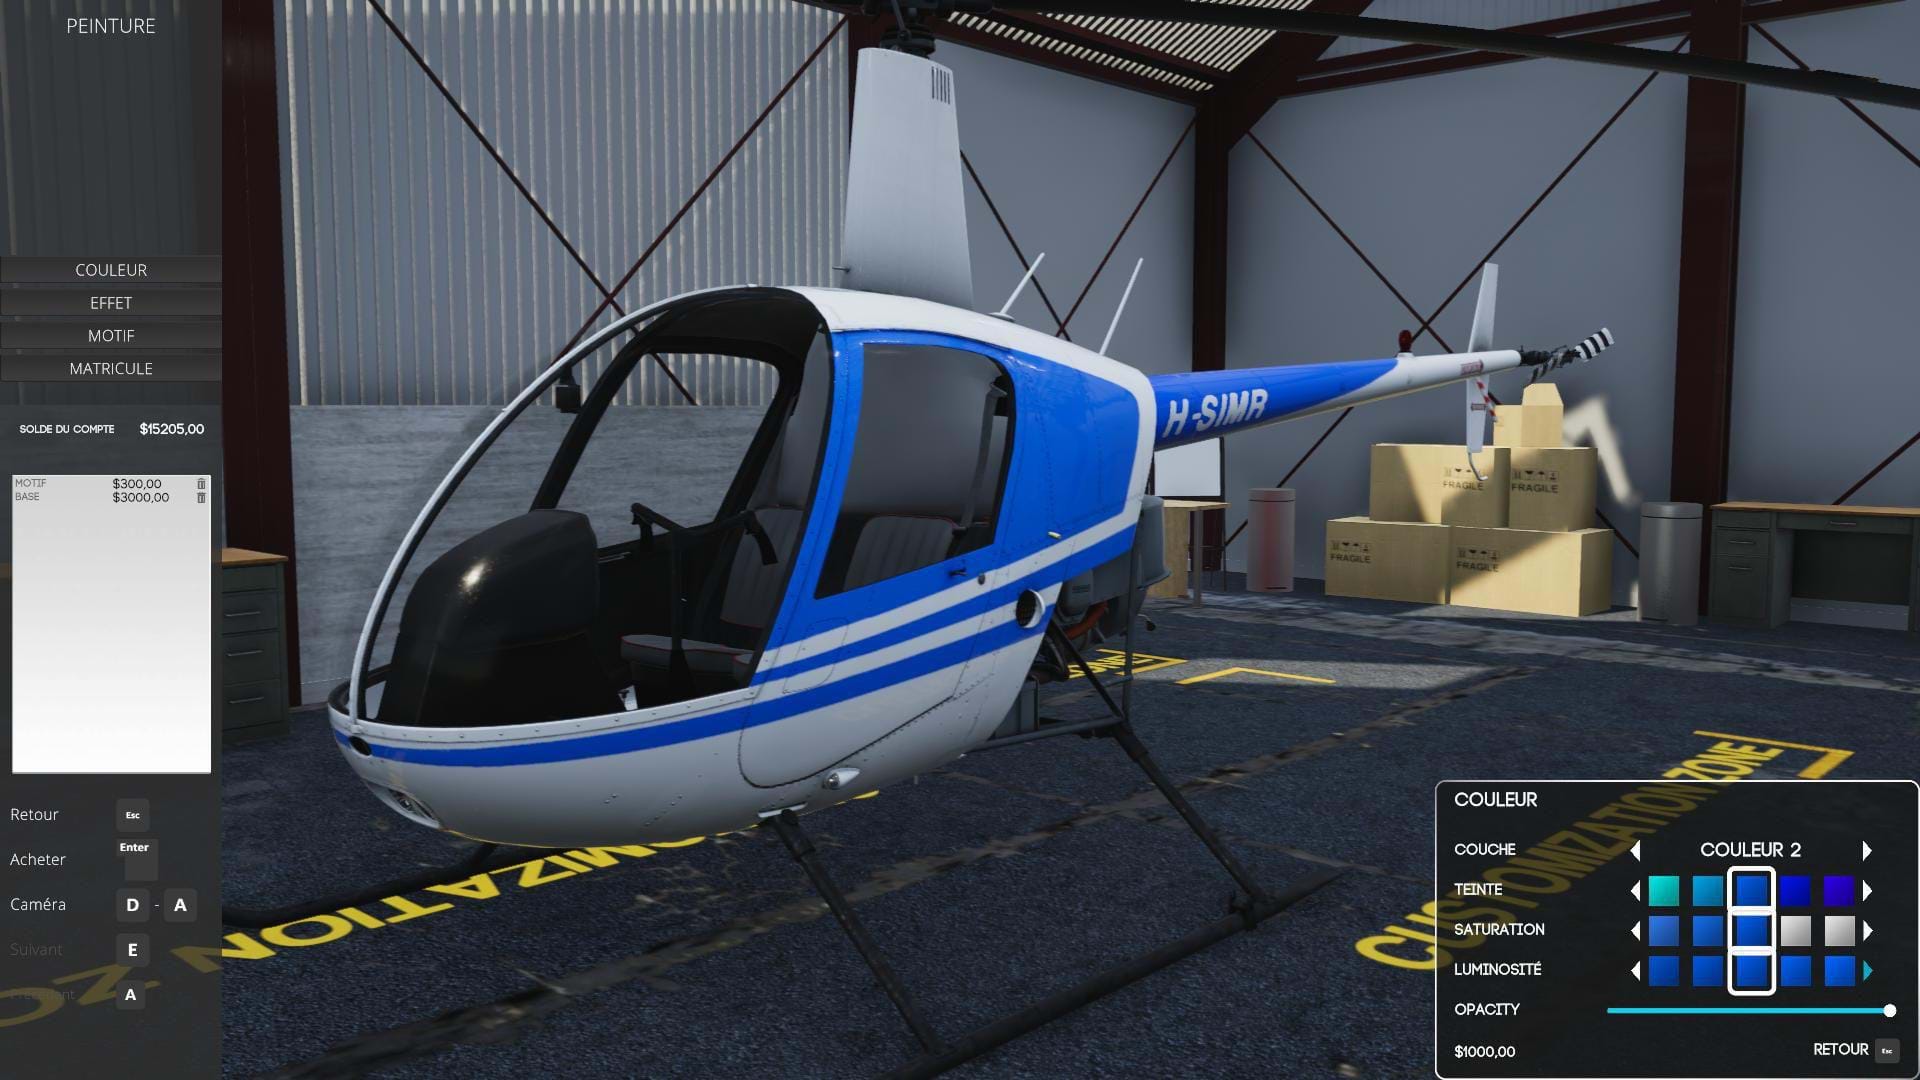 Lines Studio's Helicopter Simulator